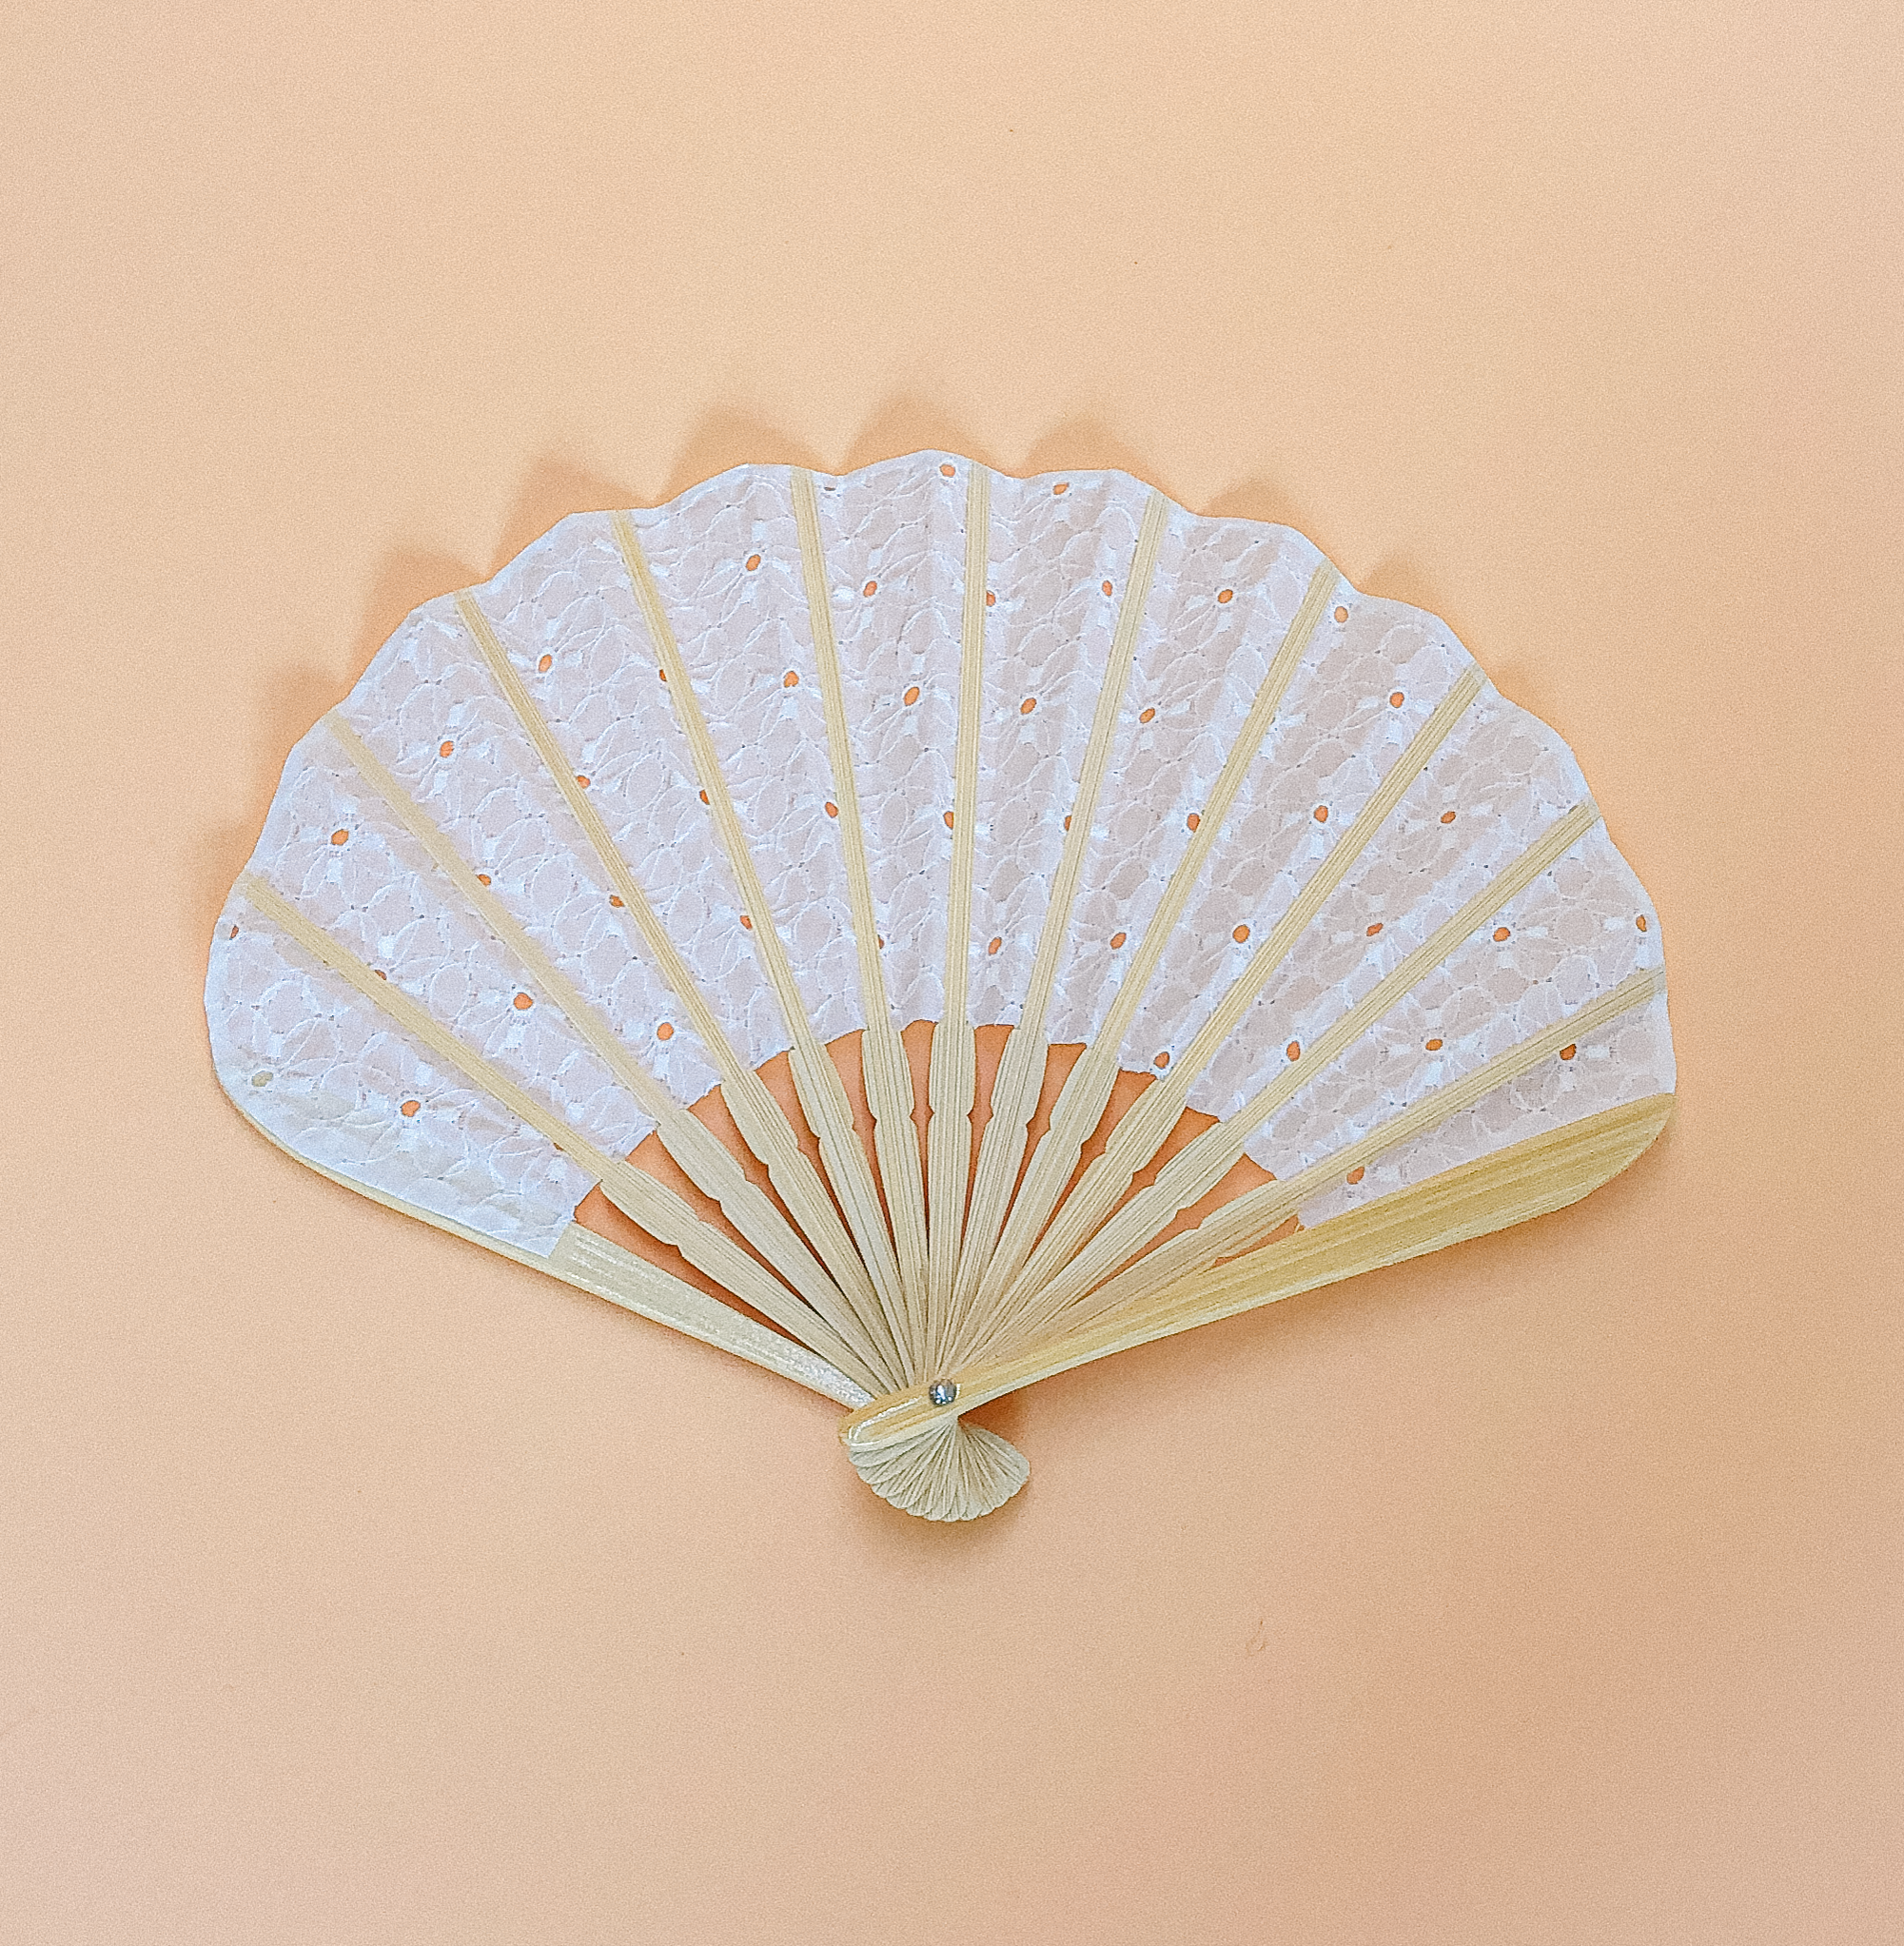 White Broderie Fan by PROSE Décor